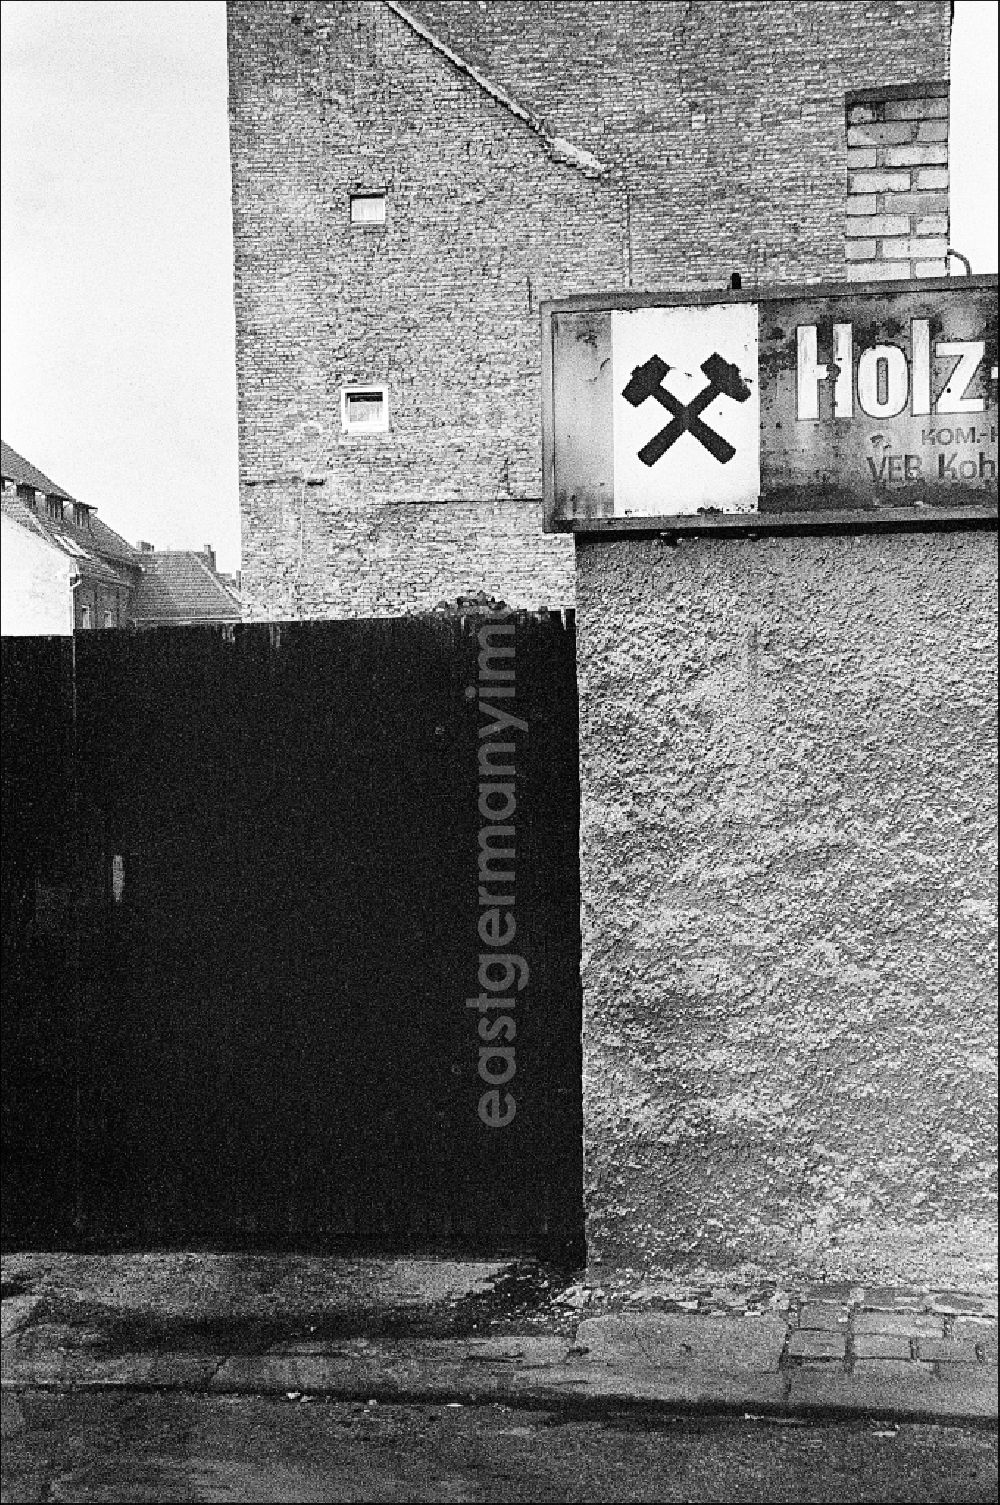 GDR photo archive: Berlin - Gate to the entrance area of the coal trade on Steinstrasse in the Mitte district of Berlin East Berlin in the territory of the former GDR, German Democratic Republic